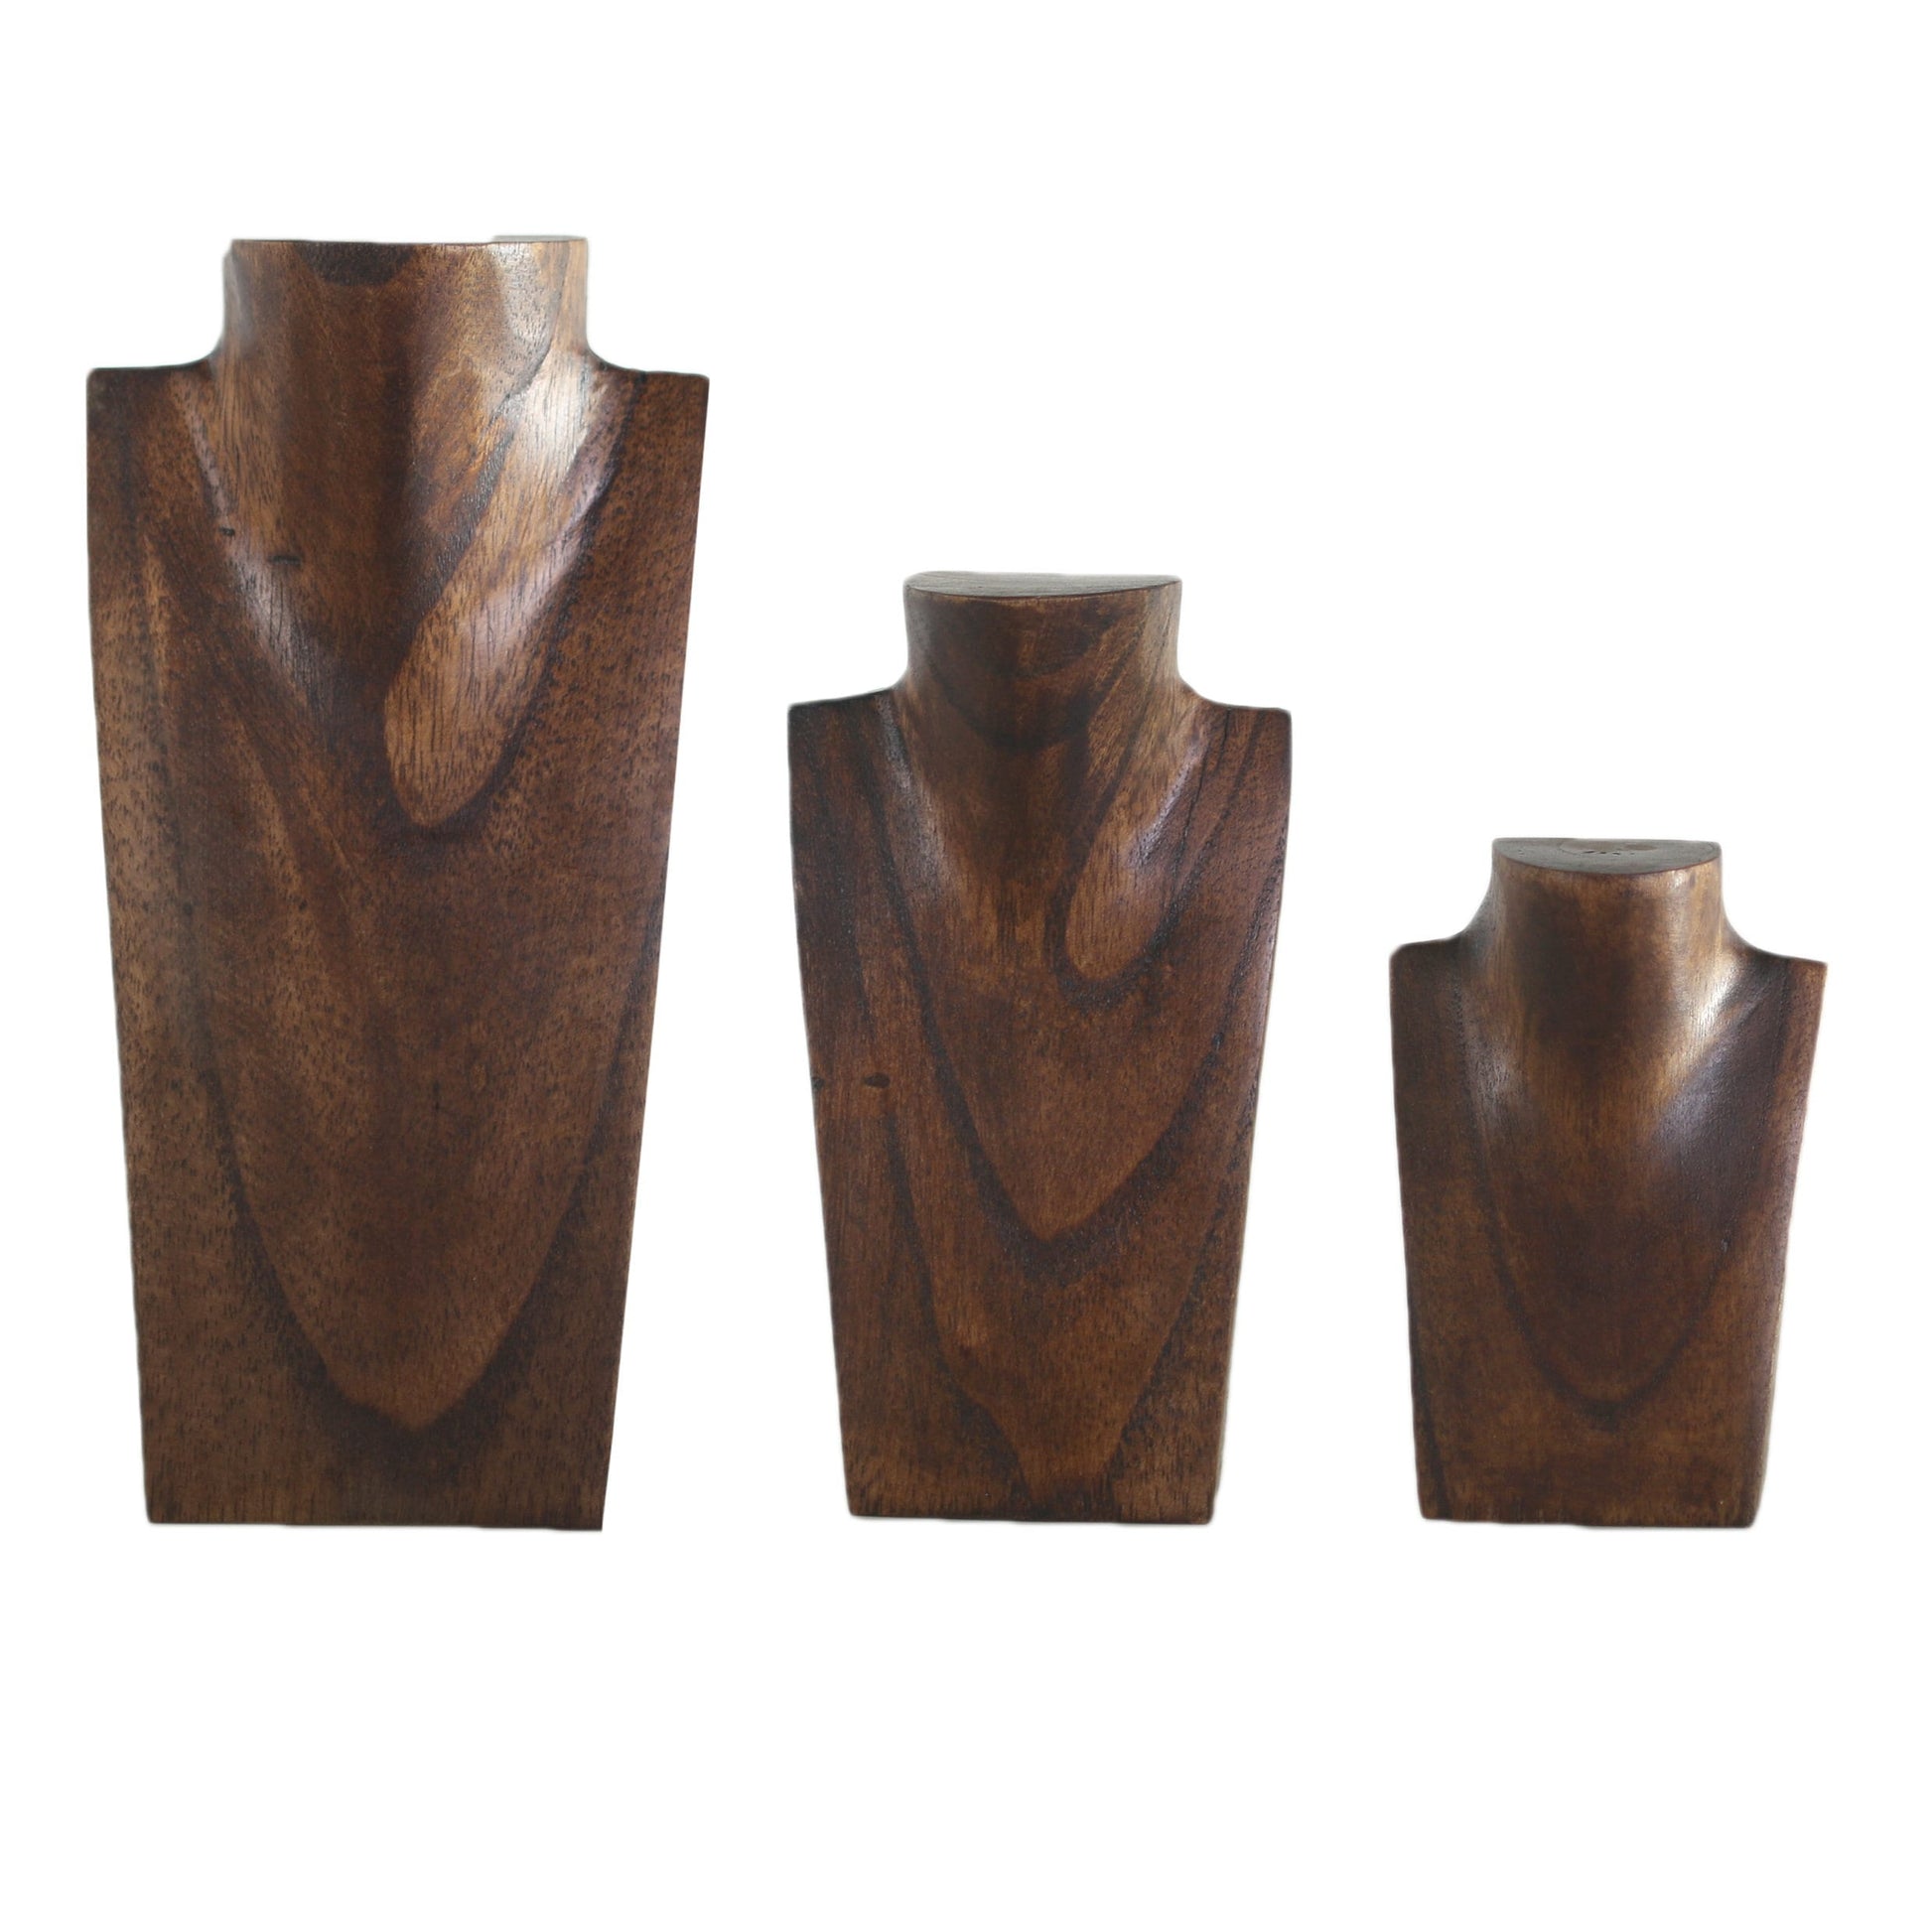 three wooden vases sitting next to each other